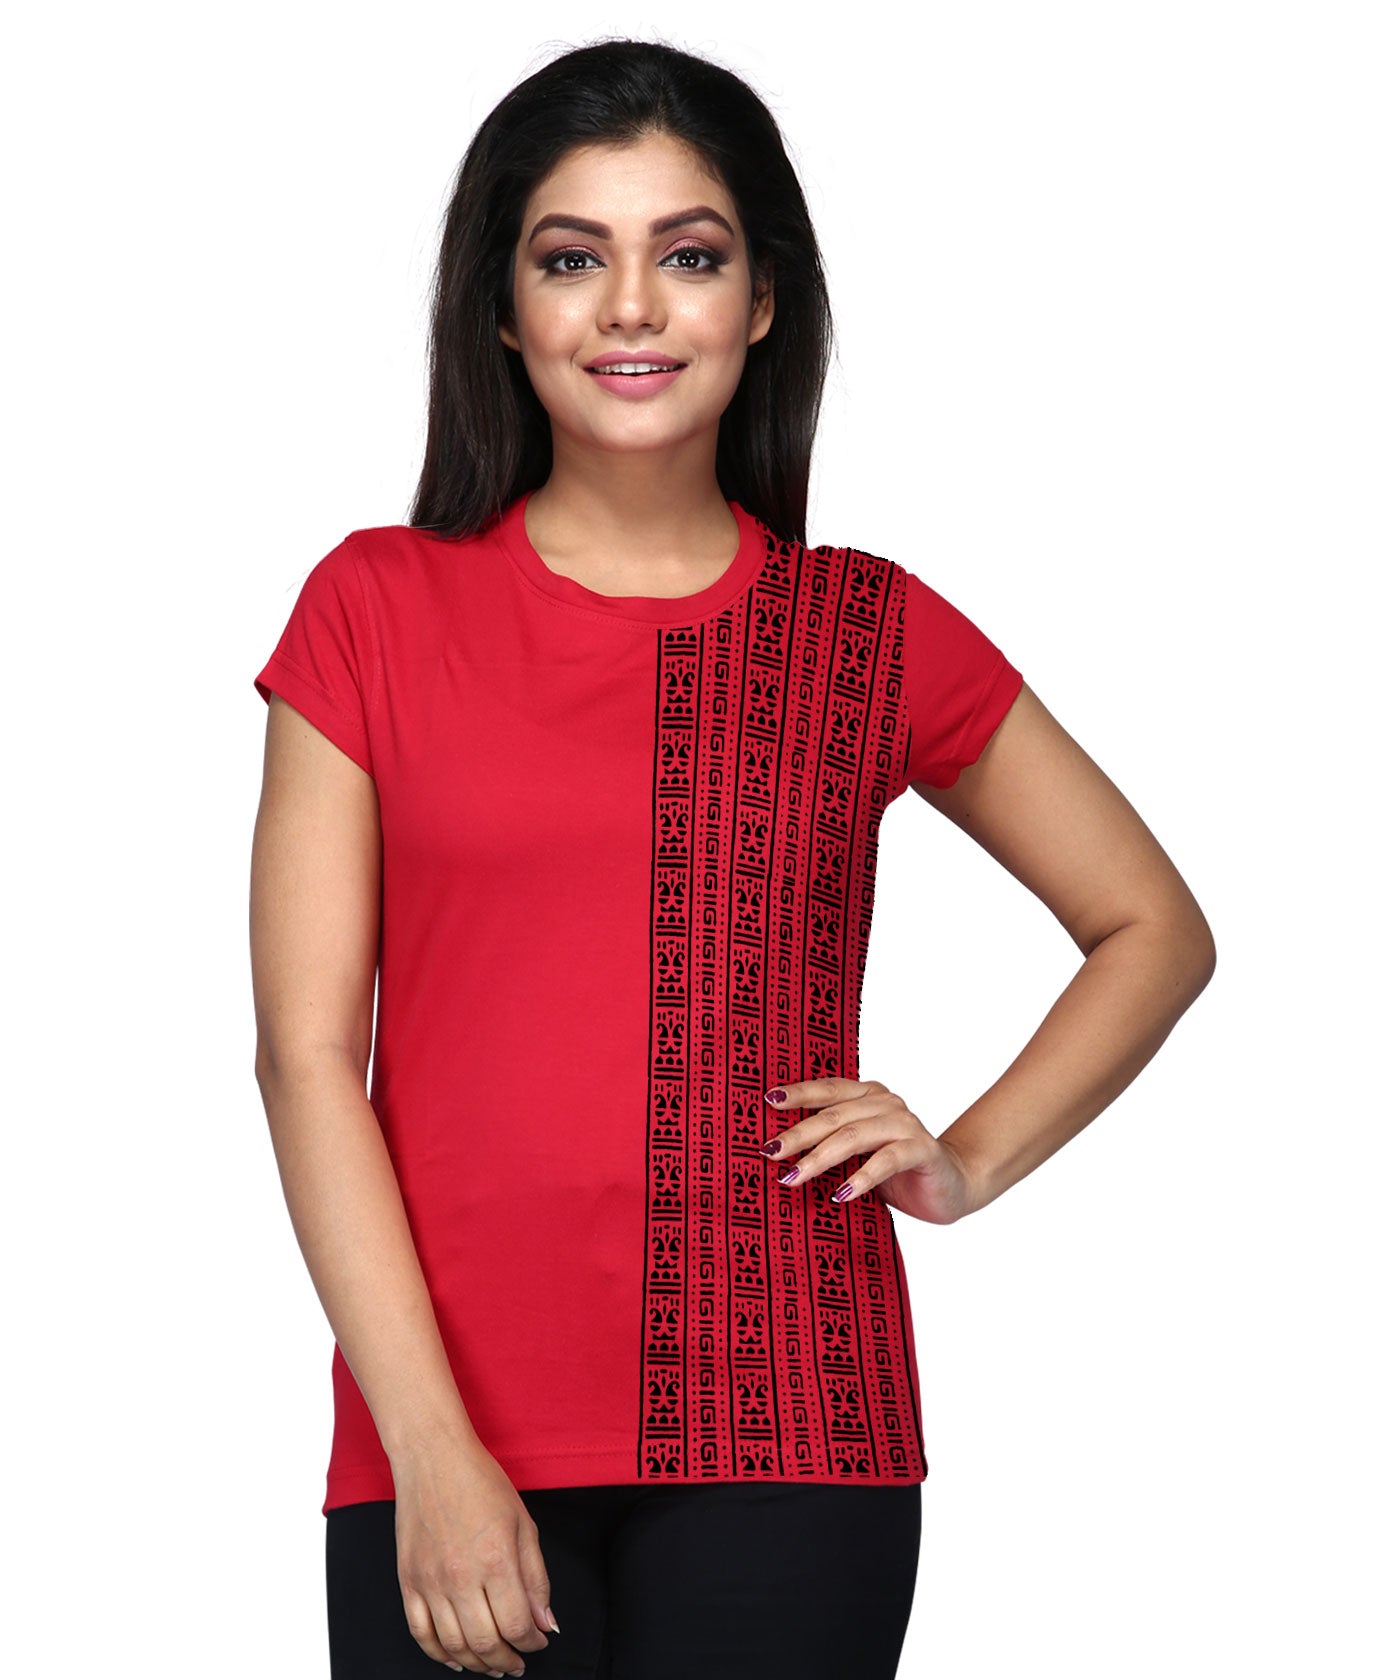 Lines - Block Print Tees for Women - Red